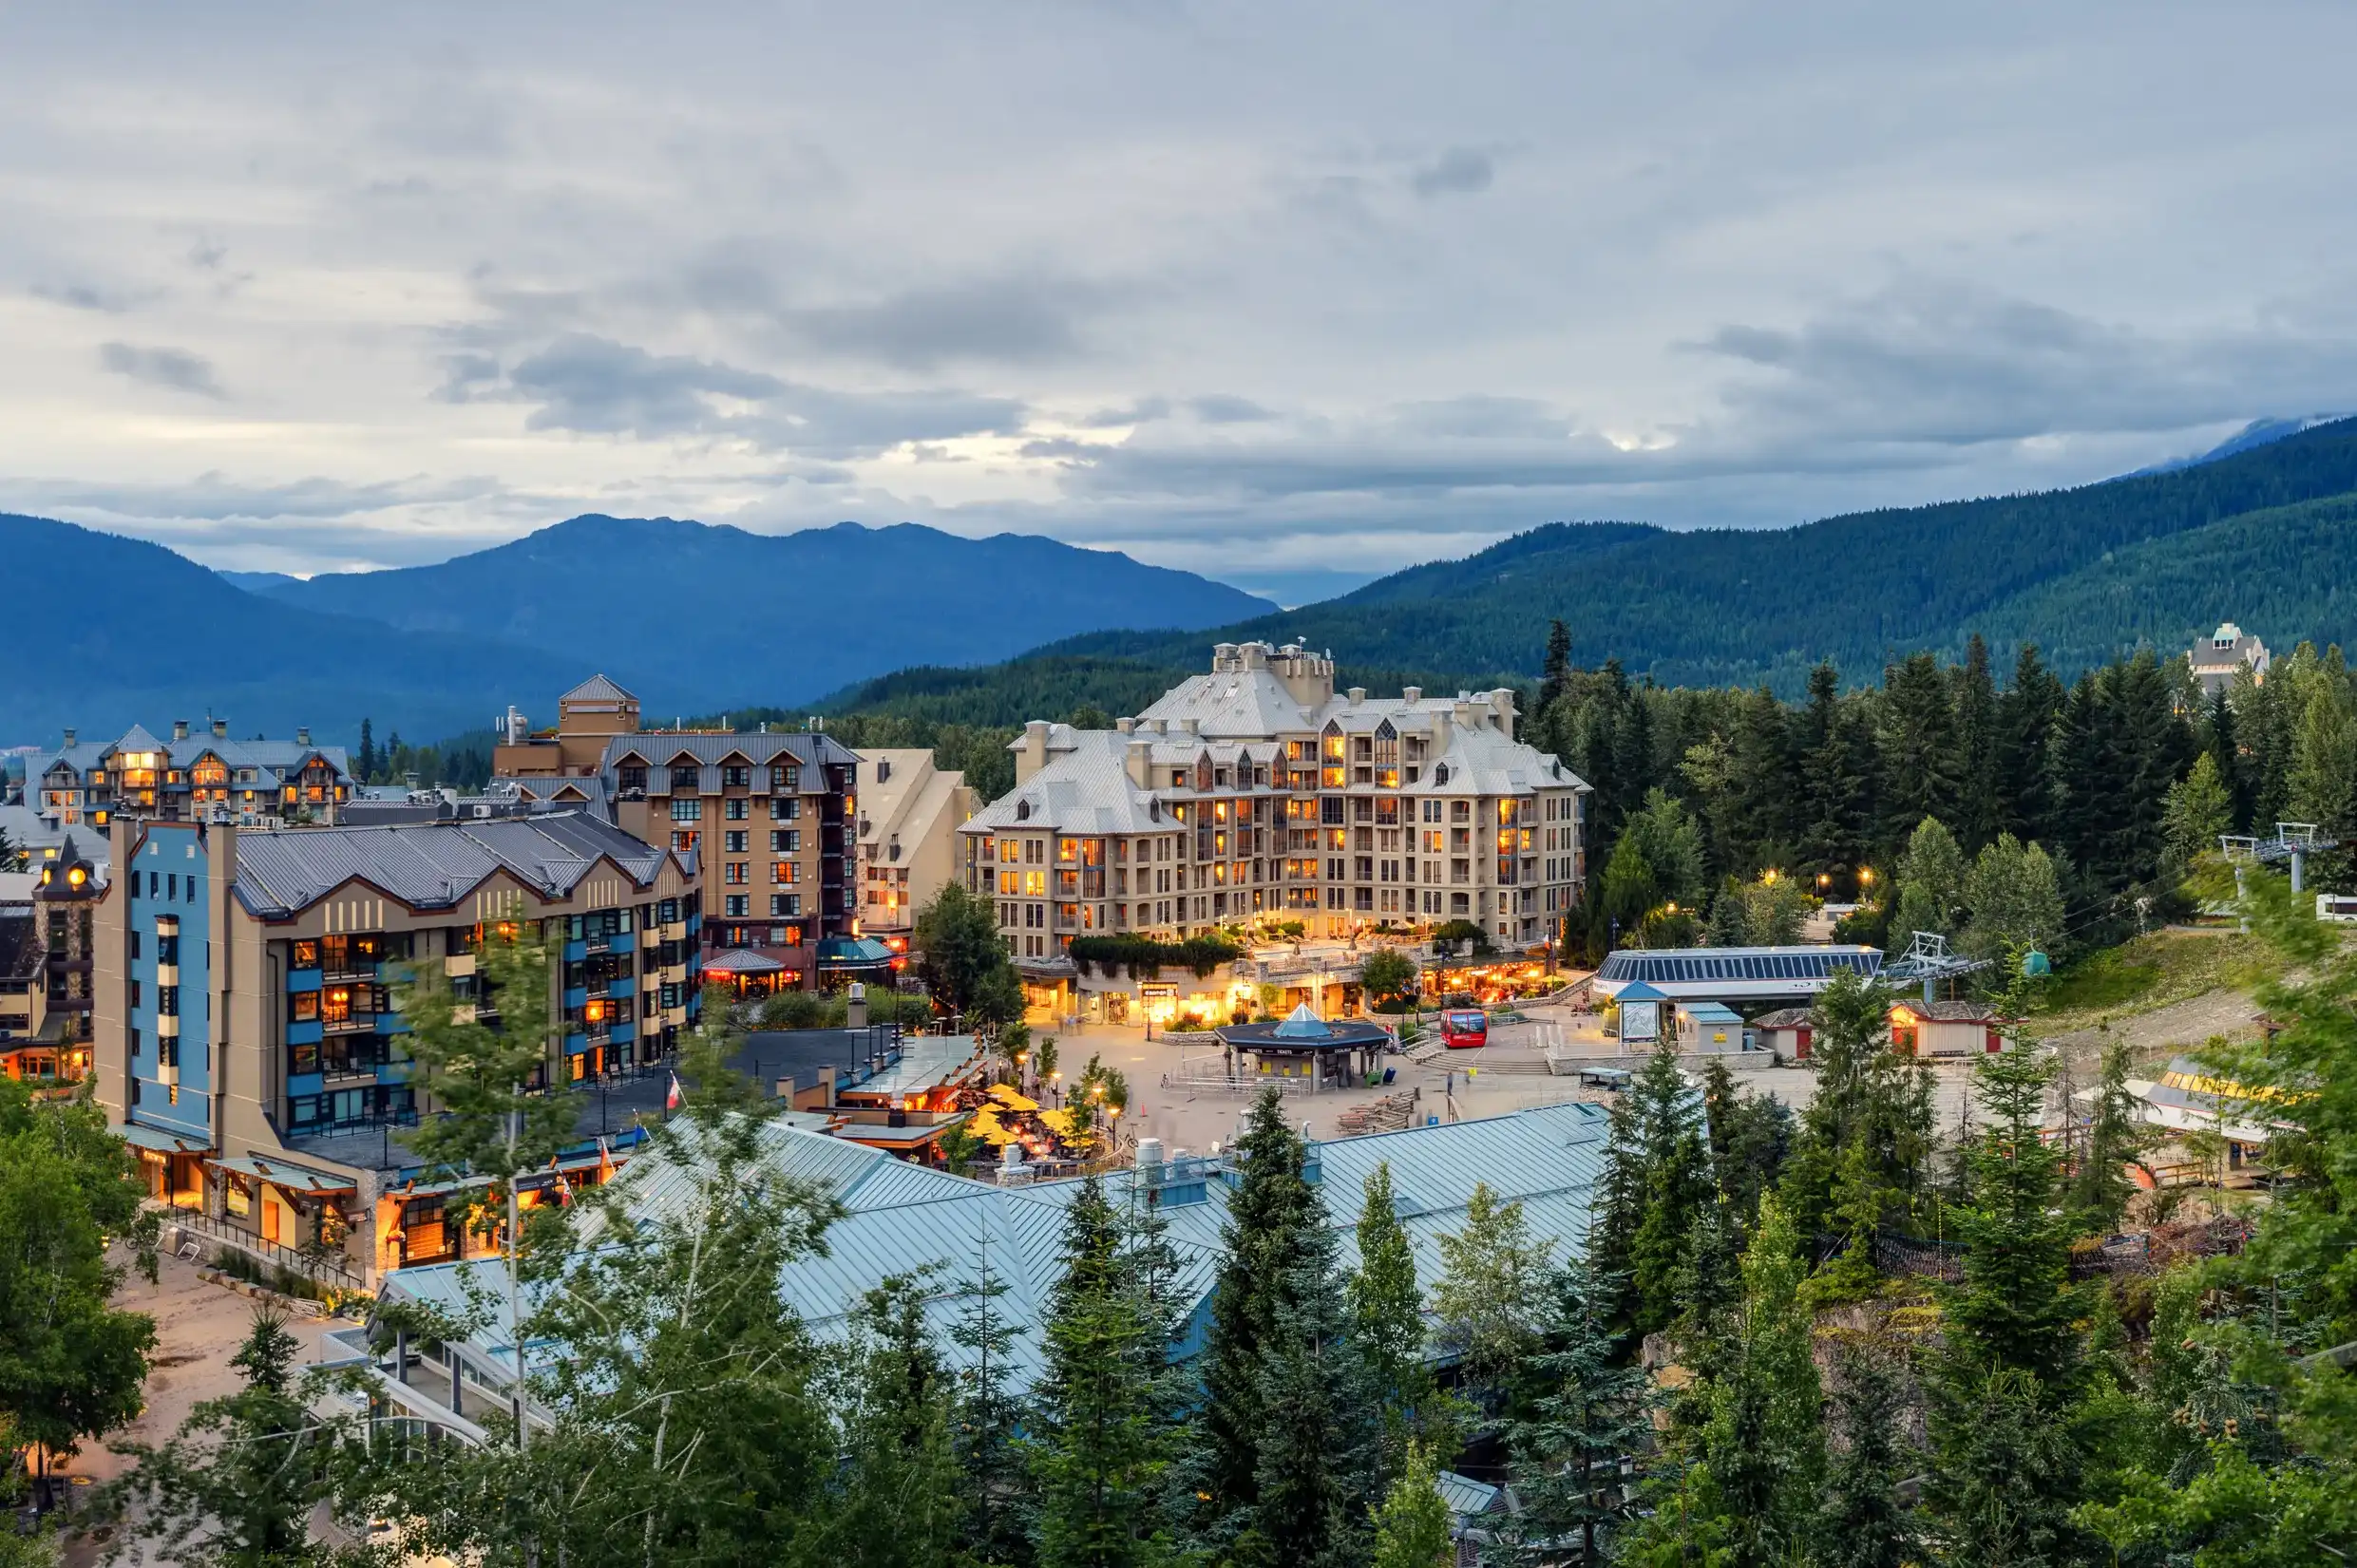 Best Whistler hotels. Cheap hotels in Whistler, British Columbia, Canada